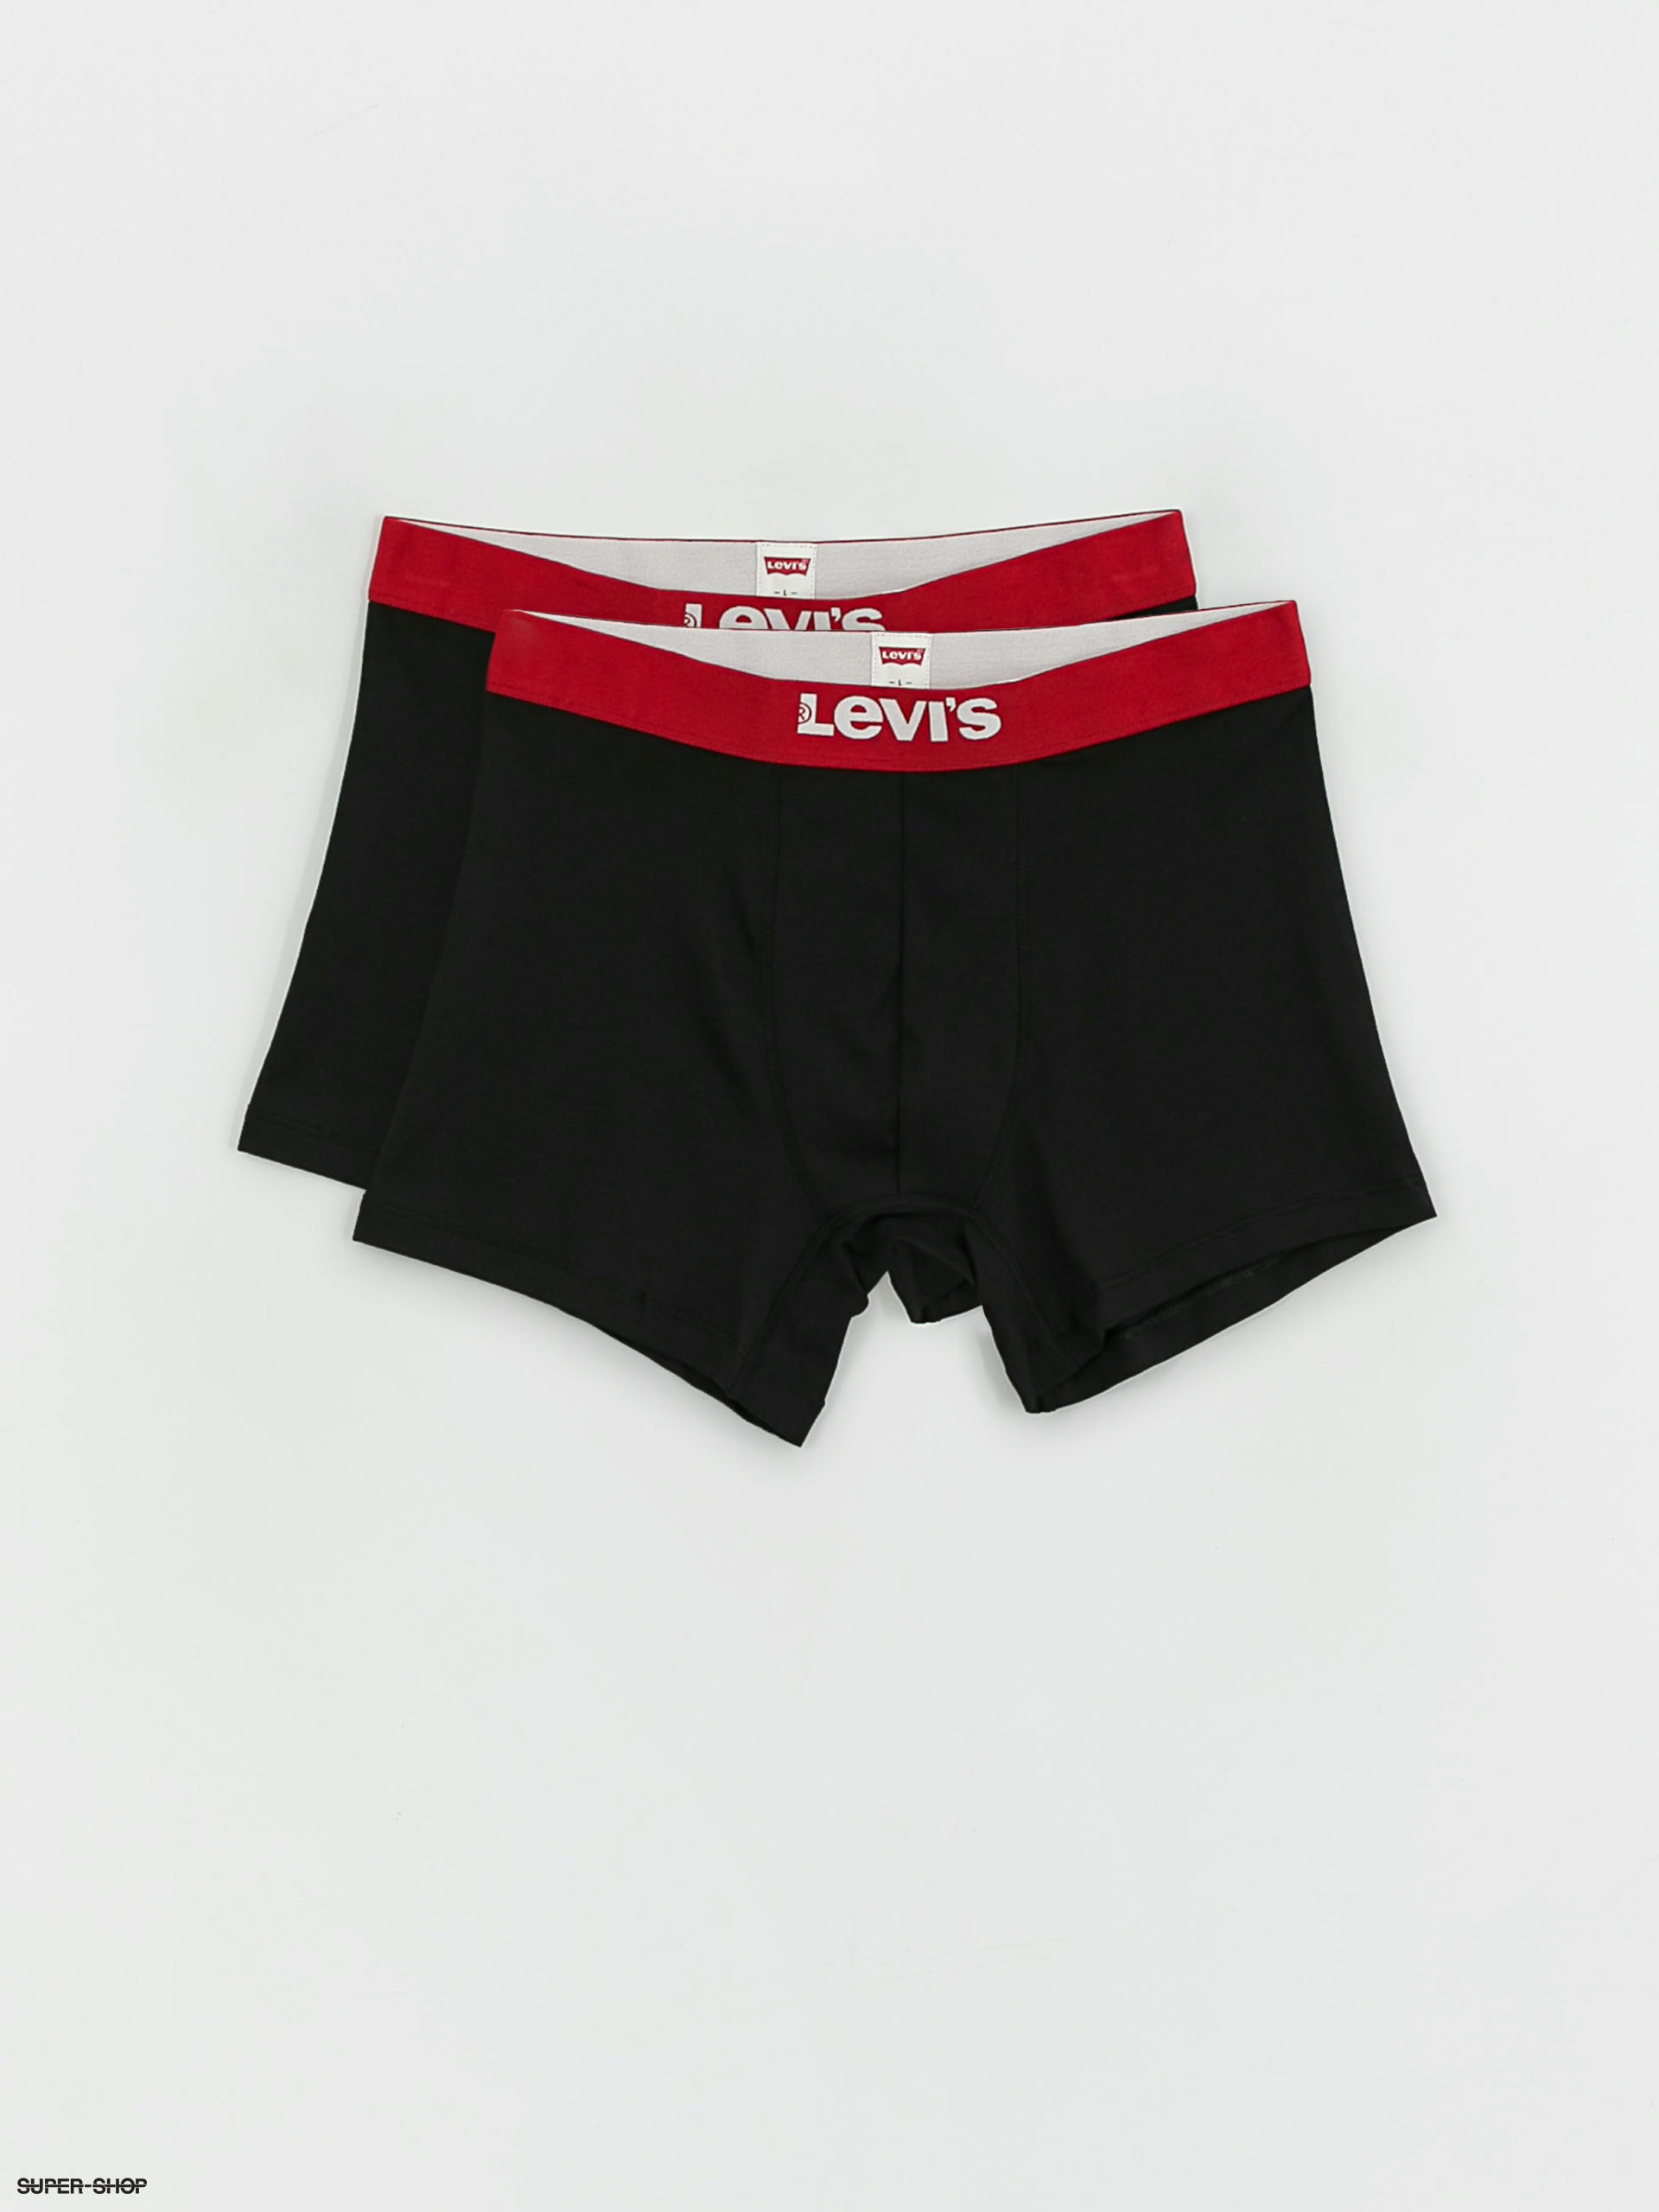 Pin on boxer or briefs